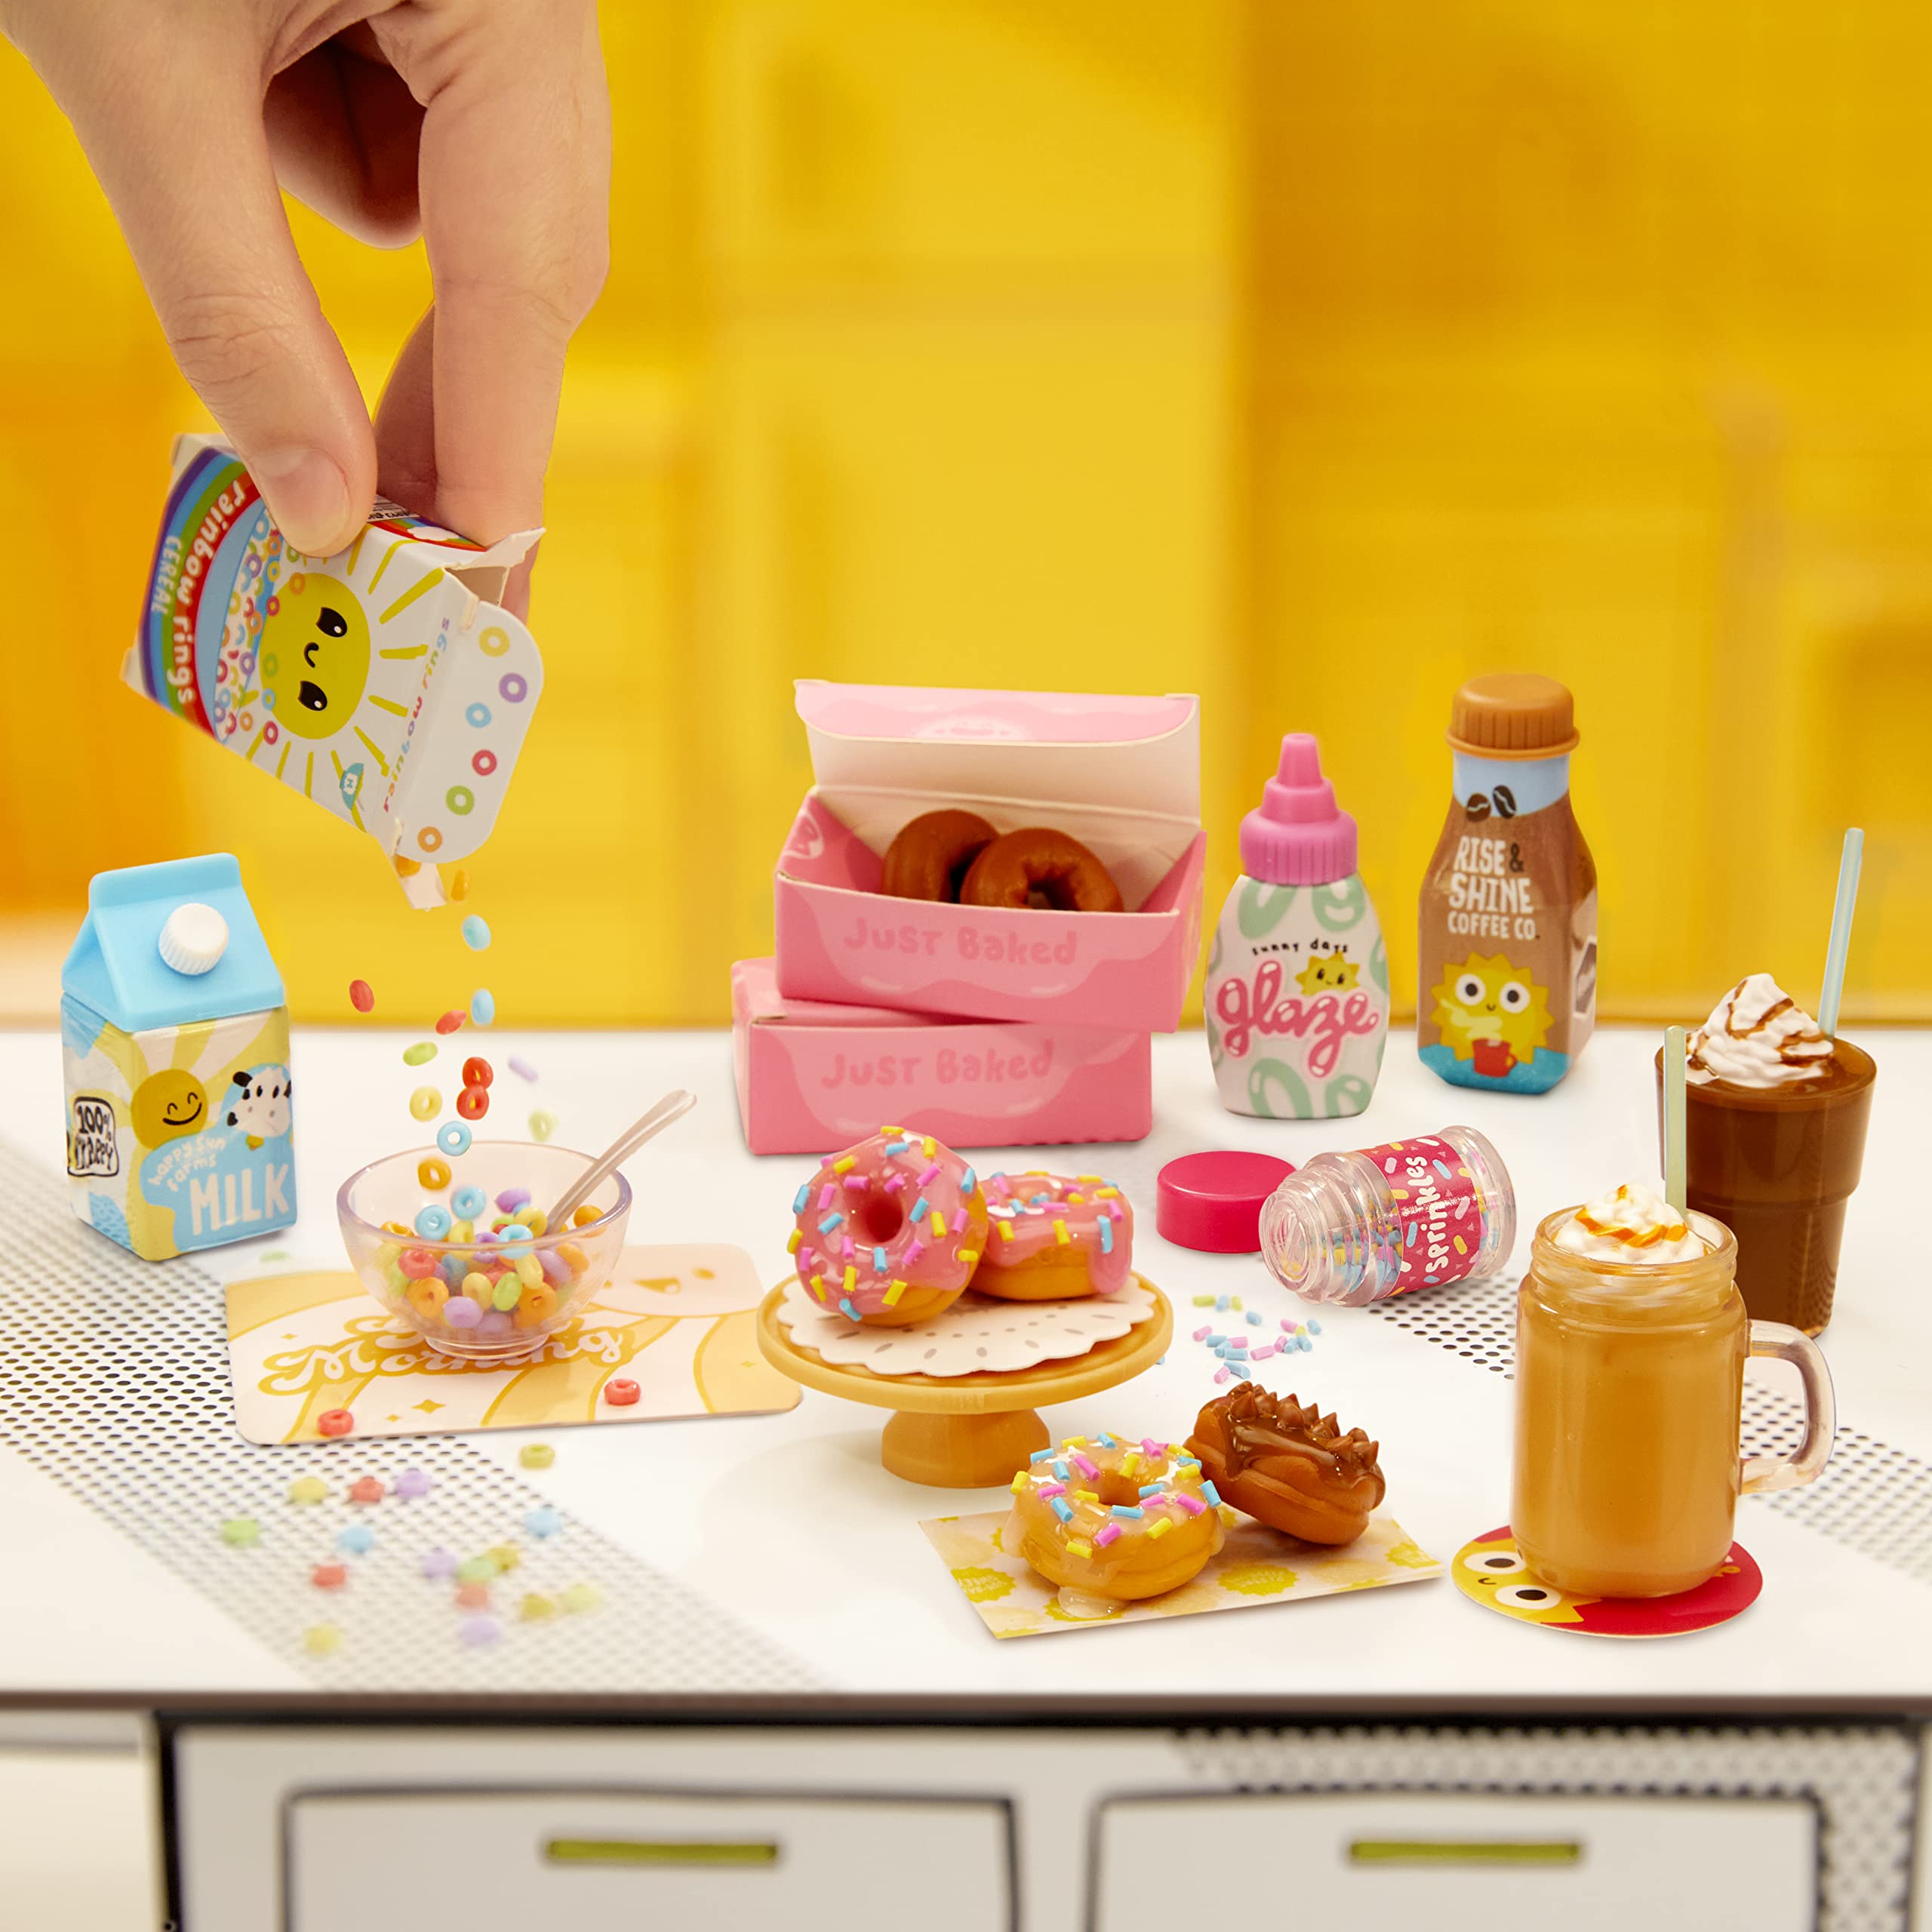 MGA's Miniverse Make It Mini Food Cafe Series 1 Breakfast Shop Bundle (4 Pack) Mini Collectibles, Blind Packaging, DIY, Resin Play, Replica Food, NOT Edible, Collectors, 8+